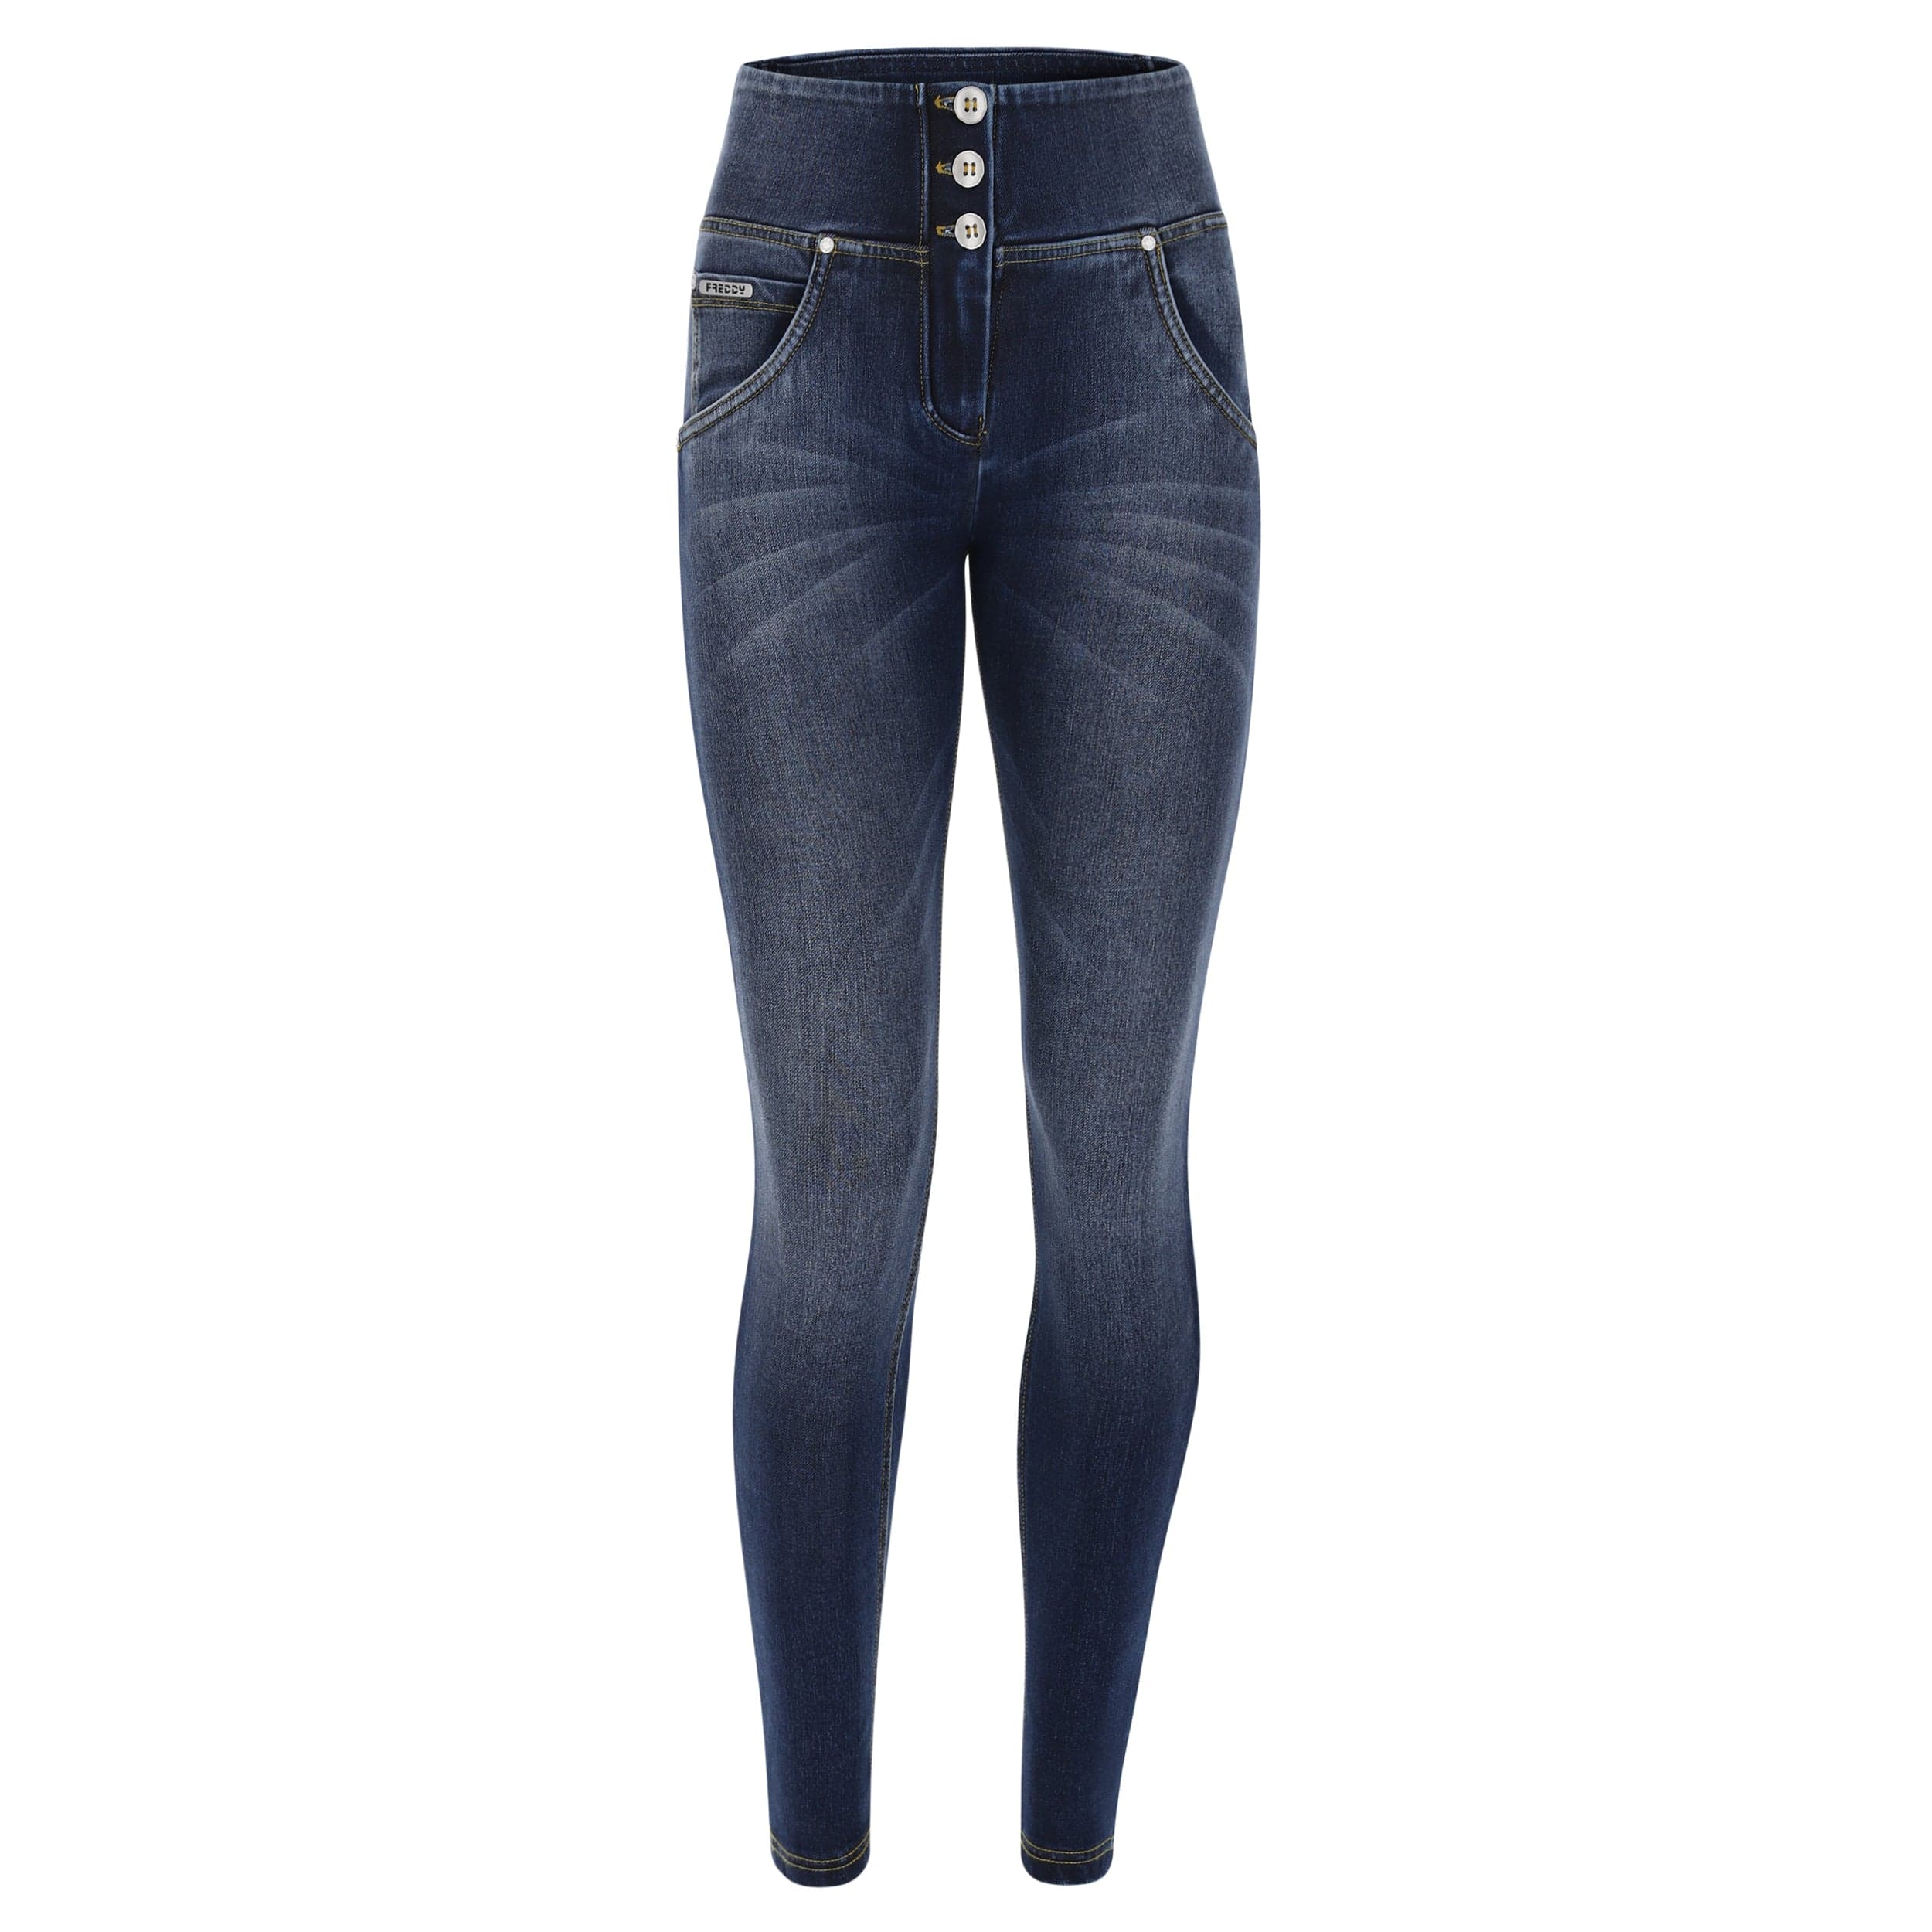 WR.UP® SNUG Jeans - 3 Button Mid Waisted - Full Length - Dark Blue + Yellow Sitching 1